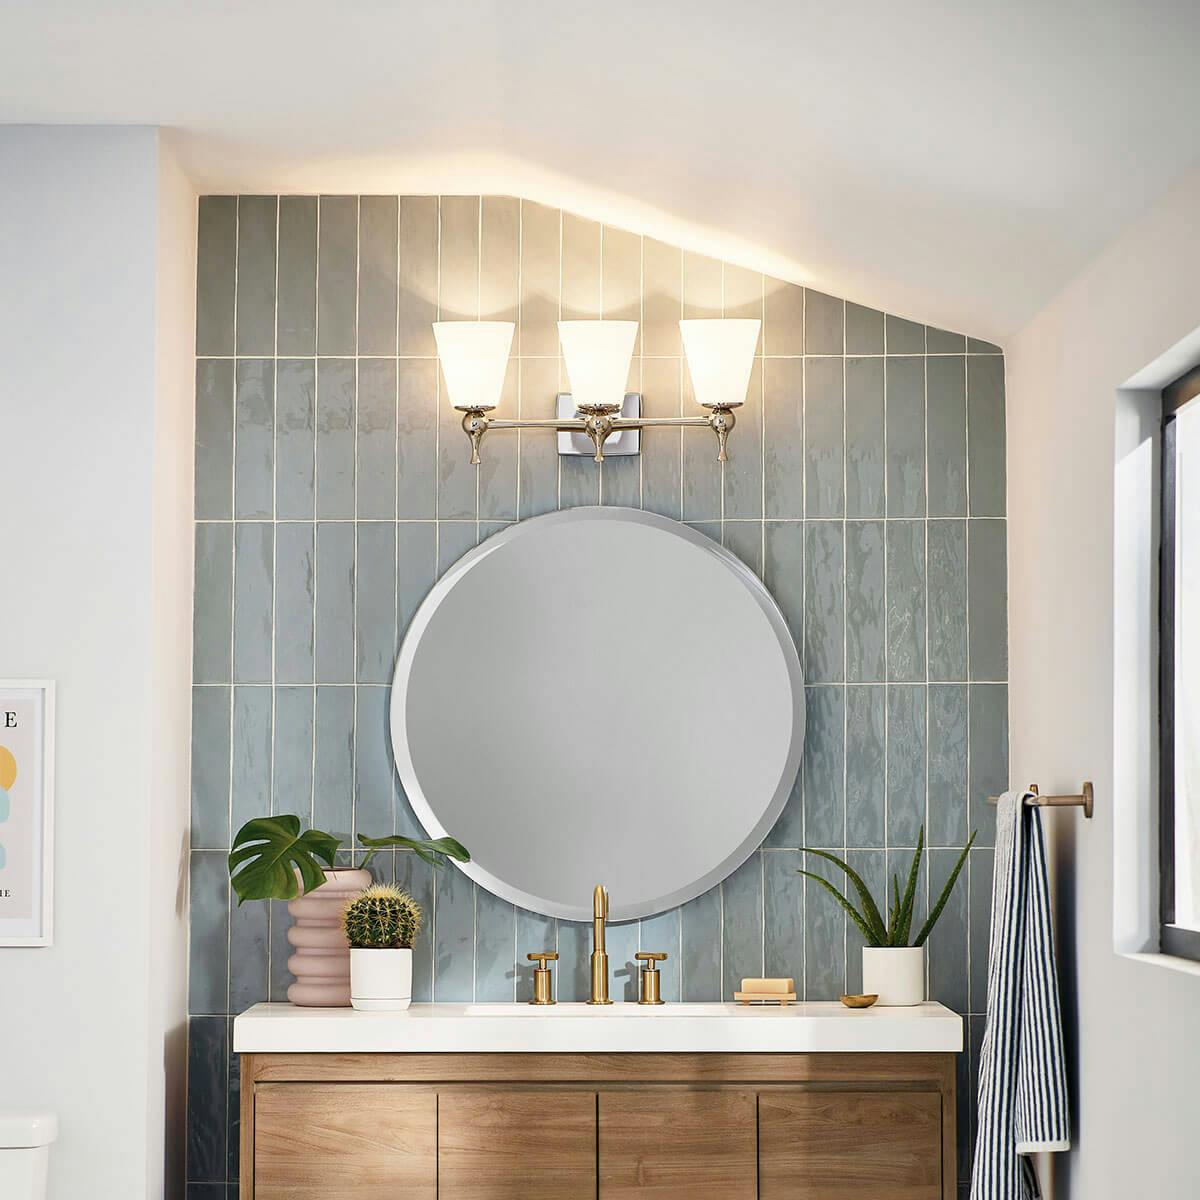 Day time Bathroom image featuring Cosabella vanity light 55092PN